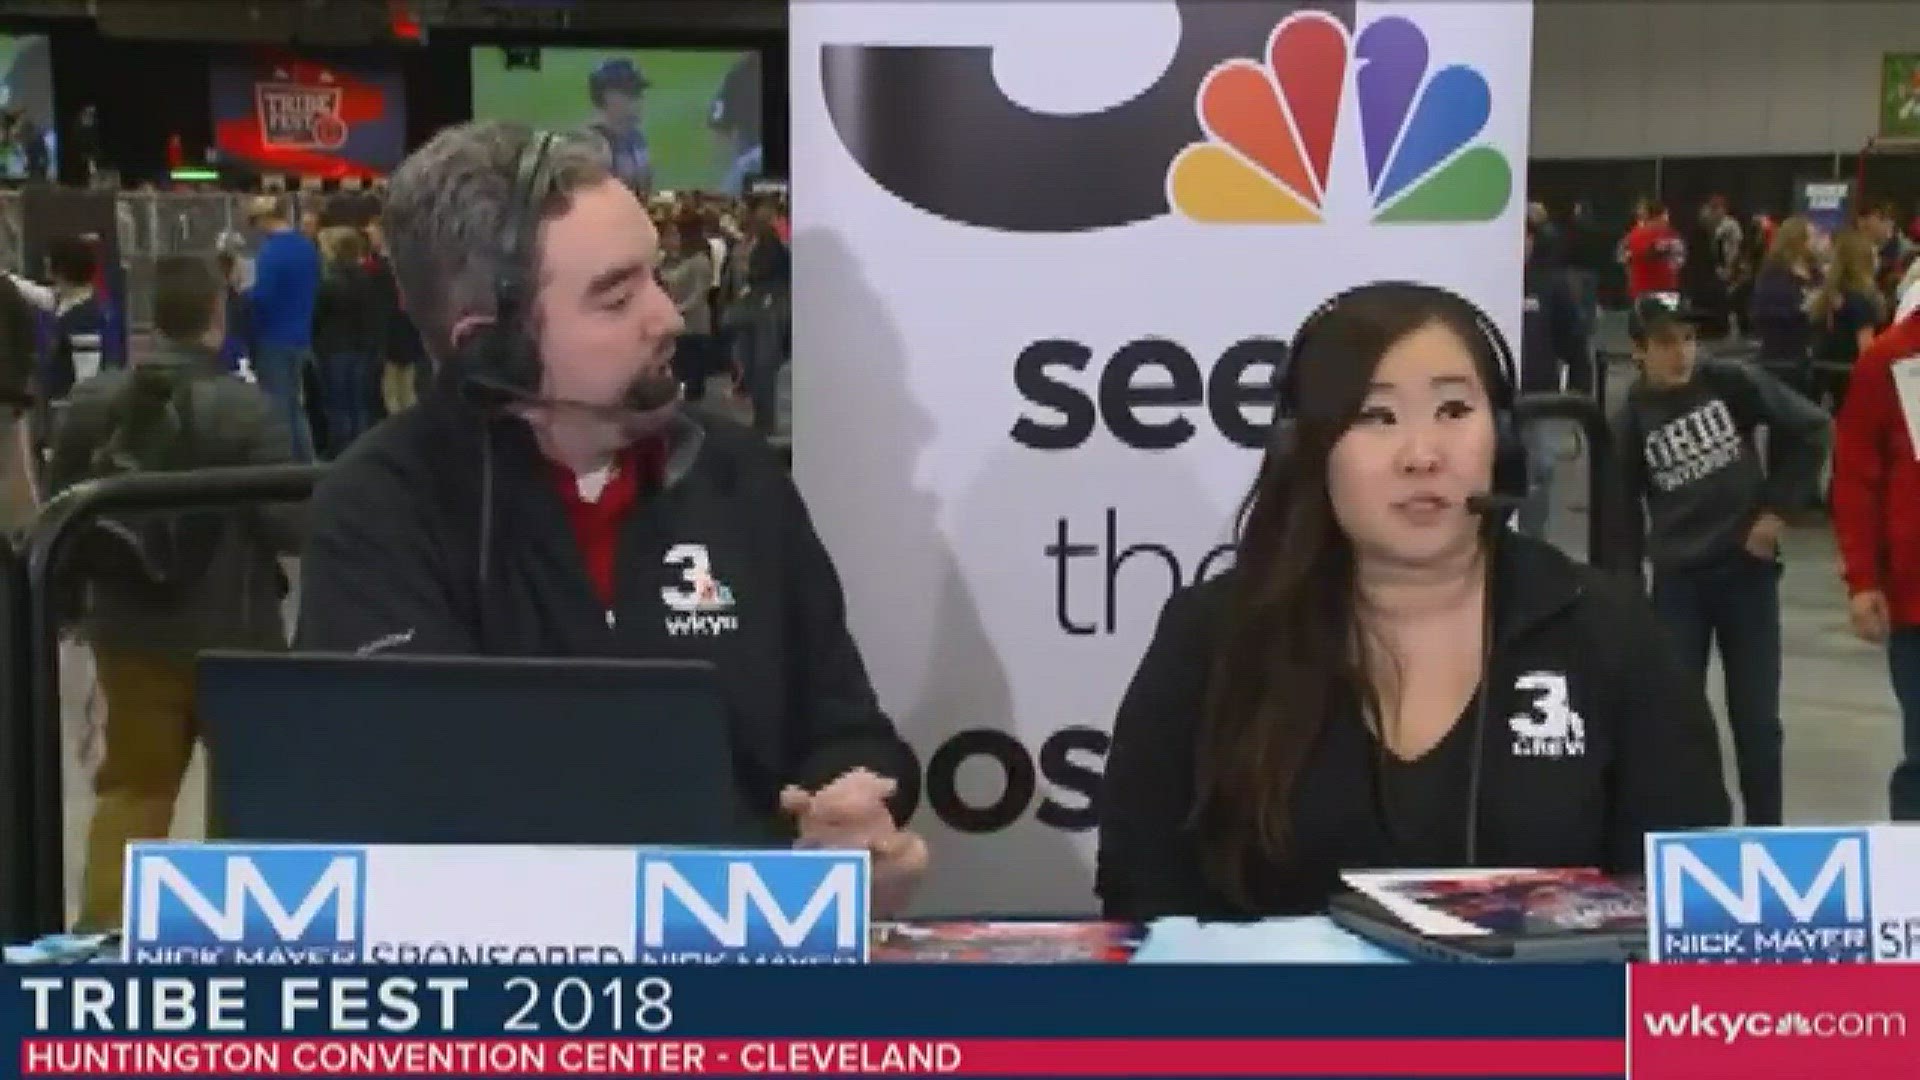 WKYC's complete coverage of Tribe Fest 2018